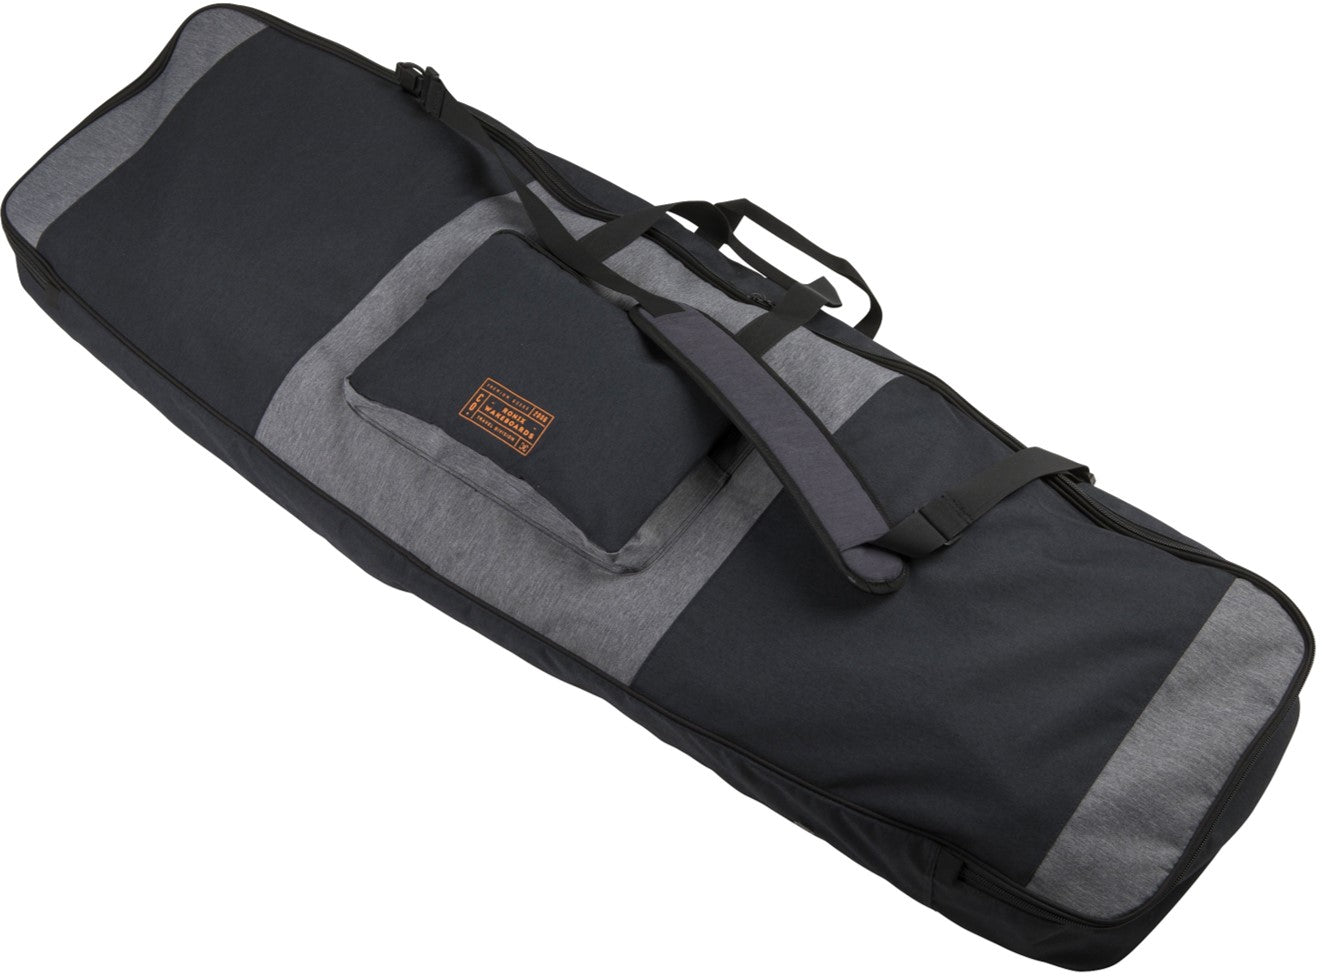 Ronix Squadron Wakeboard Bag